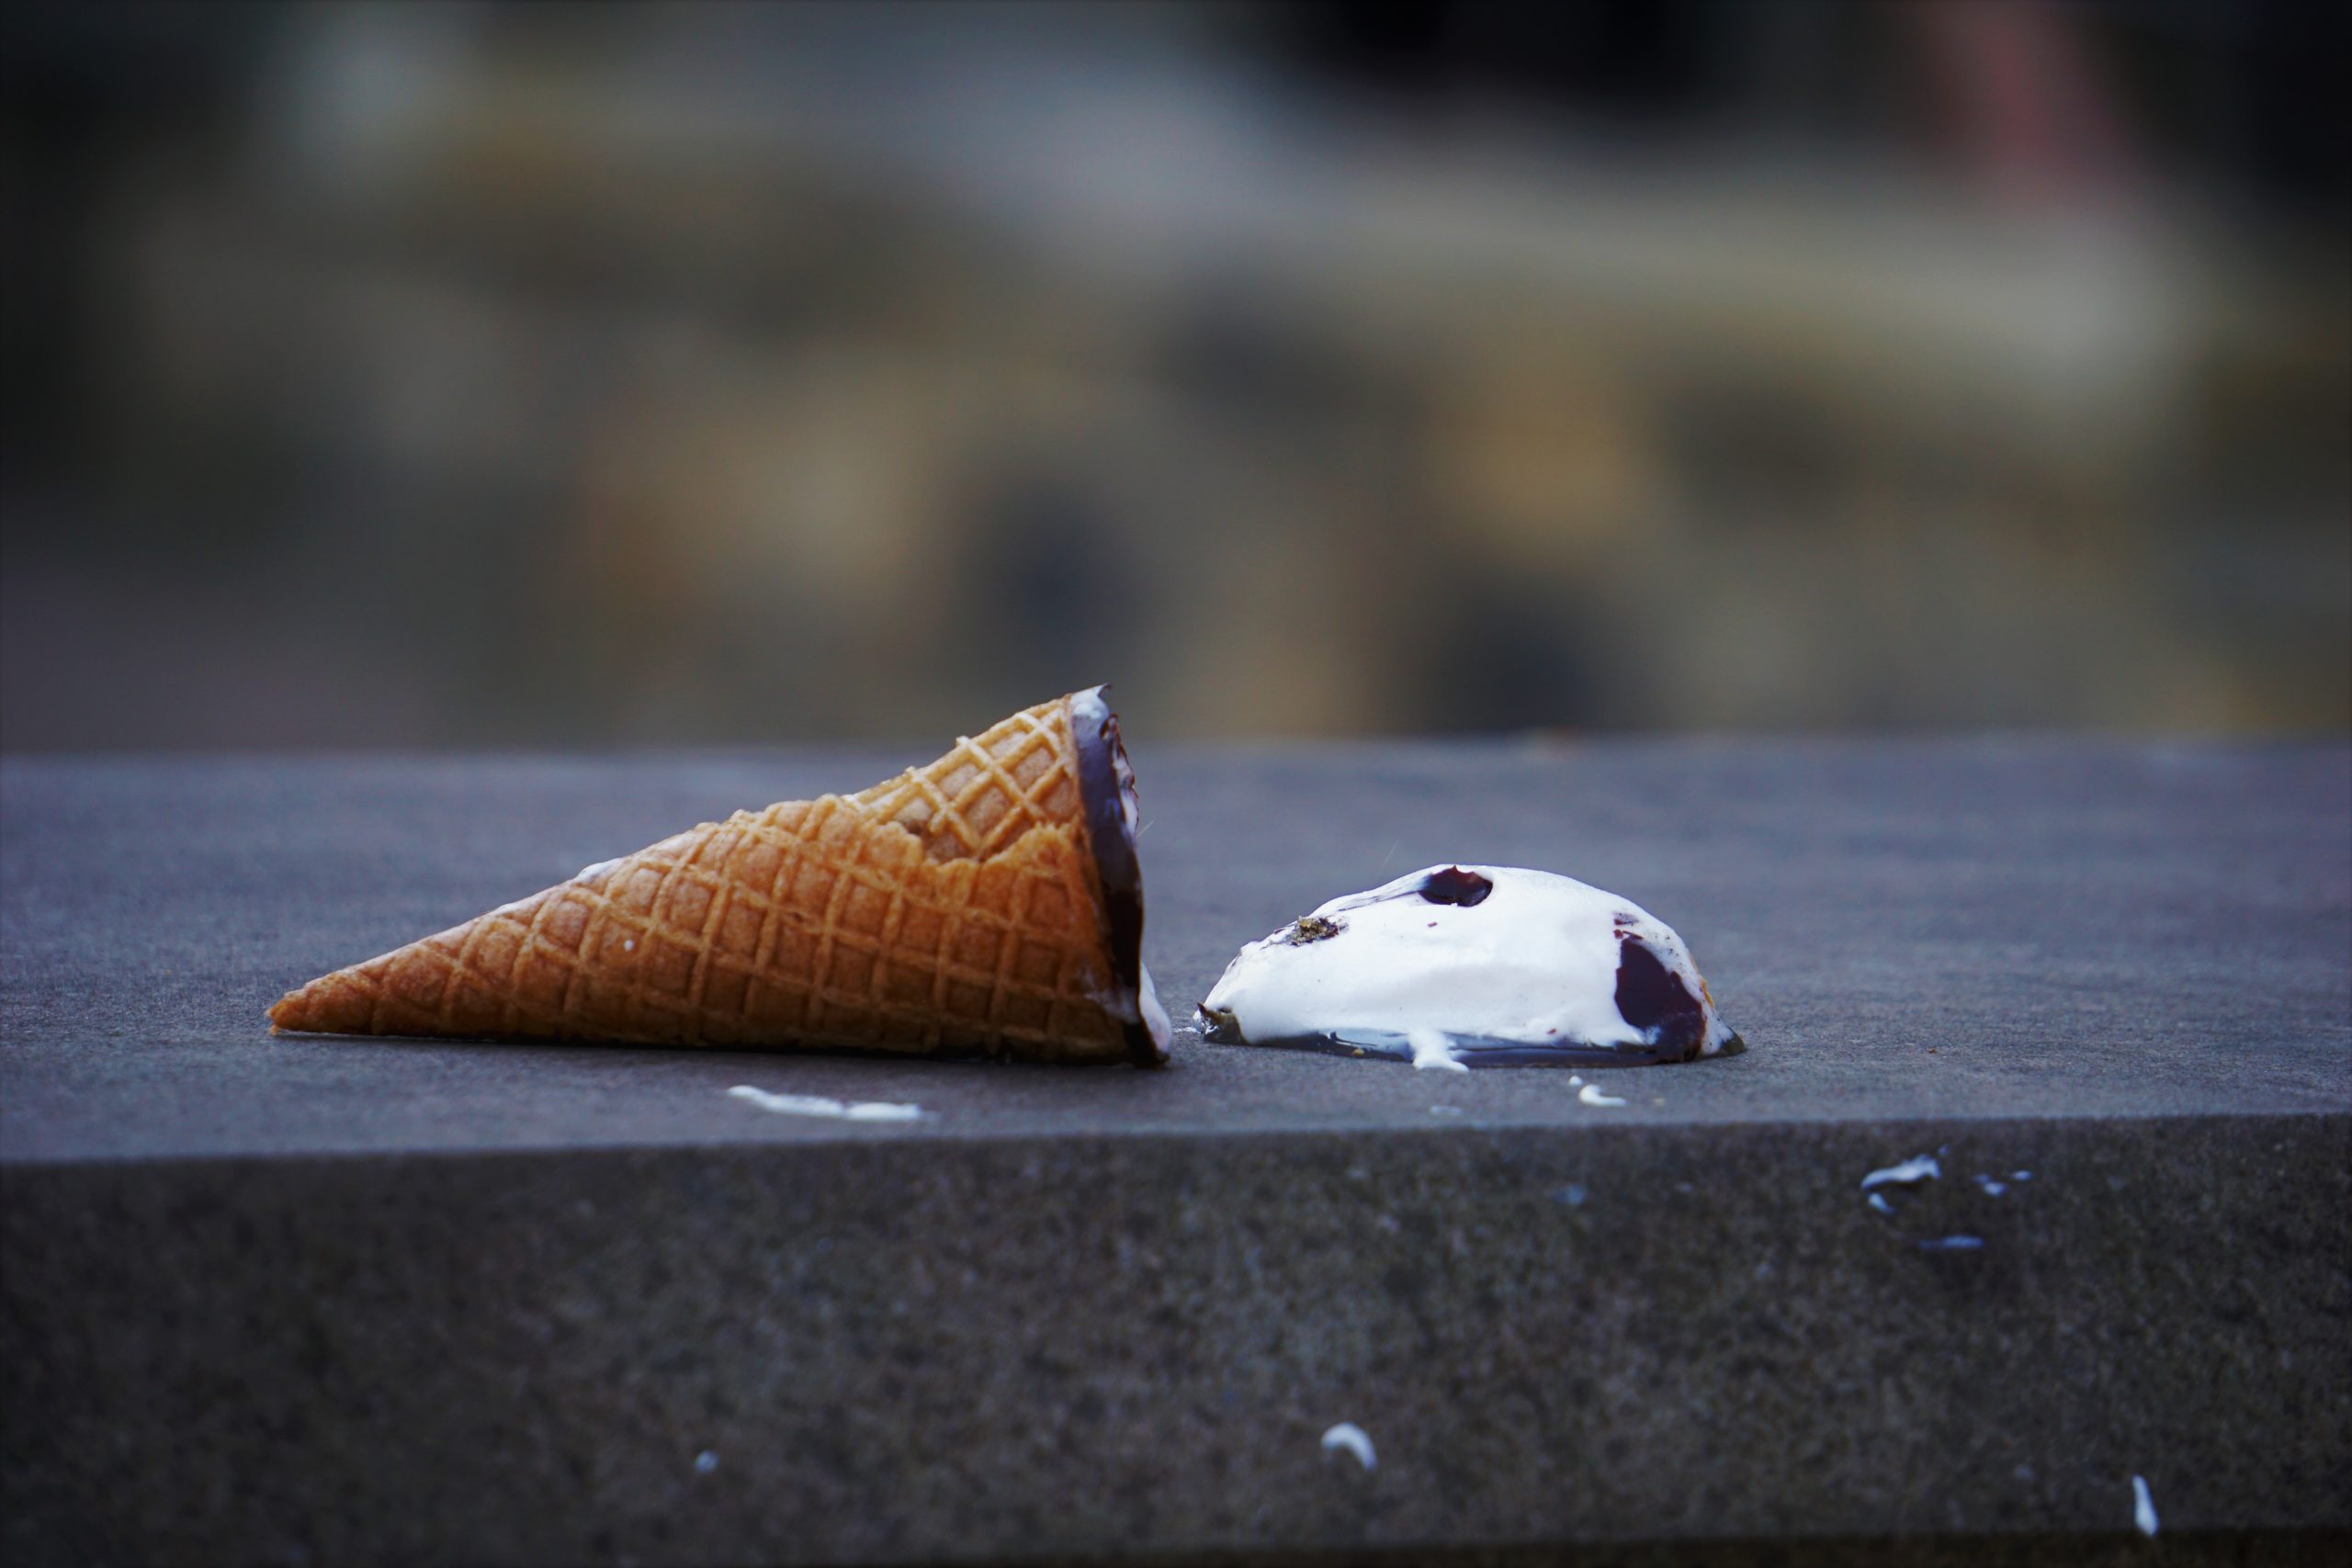 An spilled ice cream cone as an example for out-of-placeness